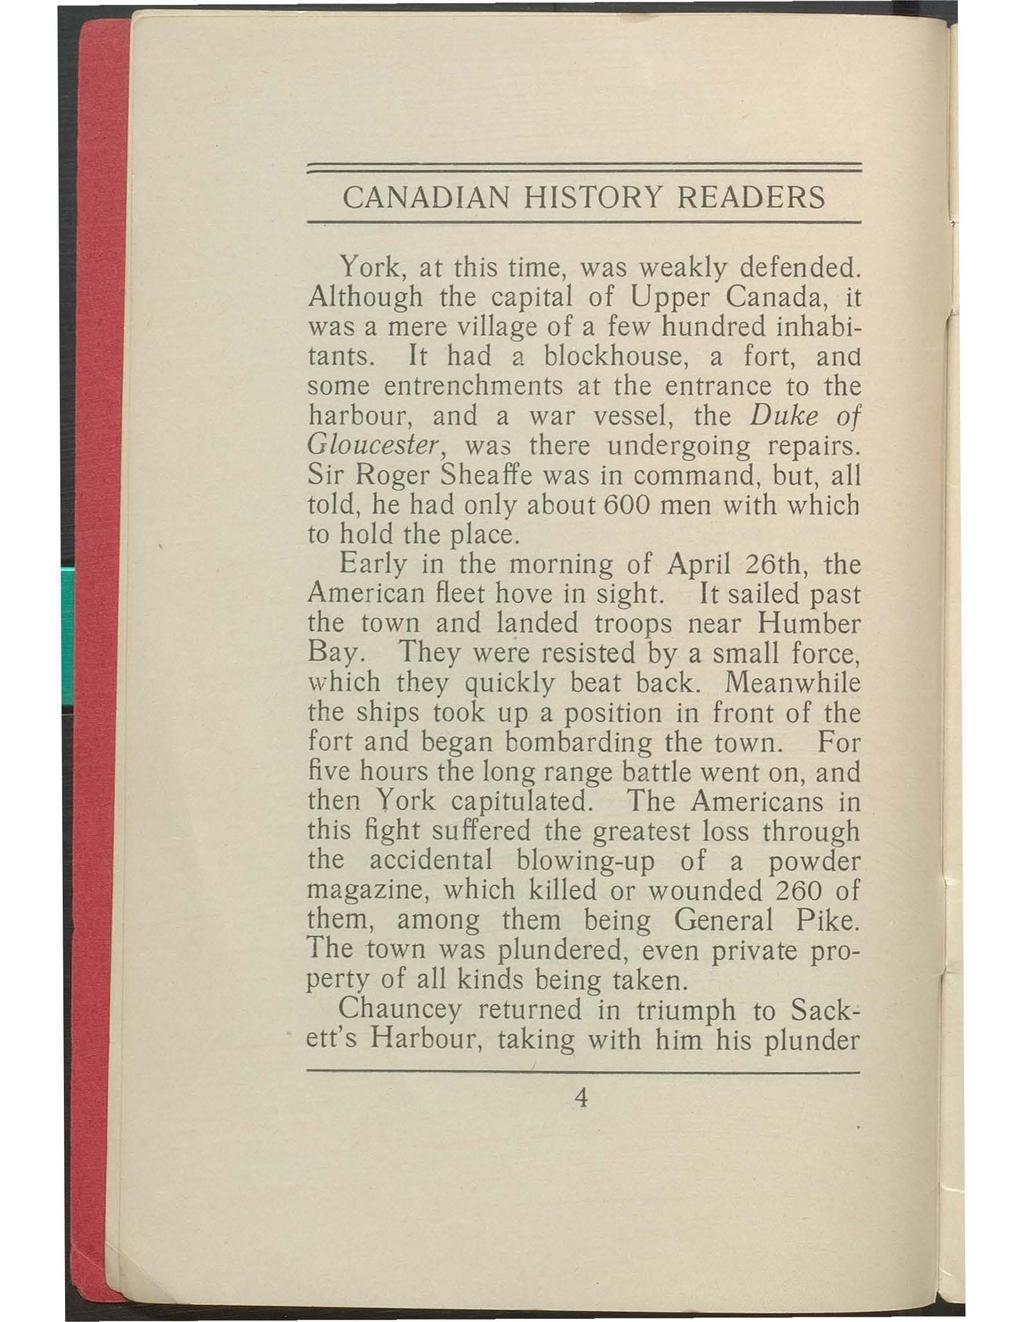 CANADIAN HISTORY READERS York, at this time, was weakly defended. Although the capital of Upper Canada, it was a mere village of a few hundred inhabitants.